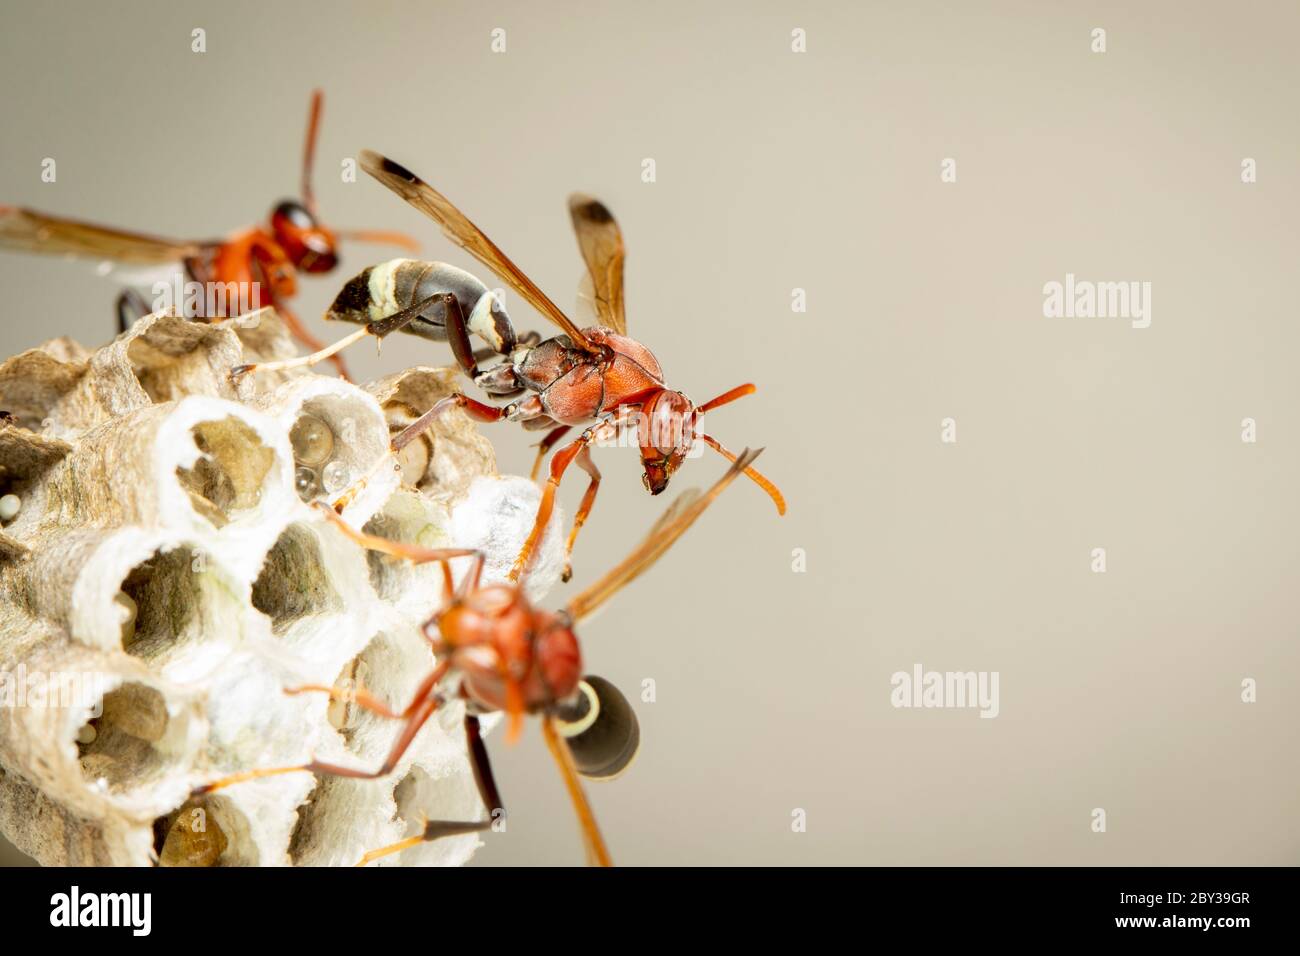 Image of Common Paper Wasp / Ropalidia fasciata and wasp nest on nature background. Insect. Animal Stock Photo